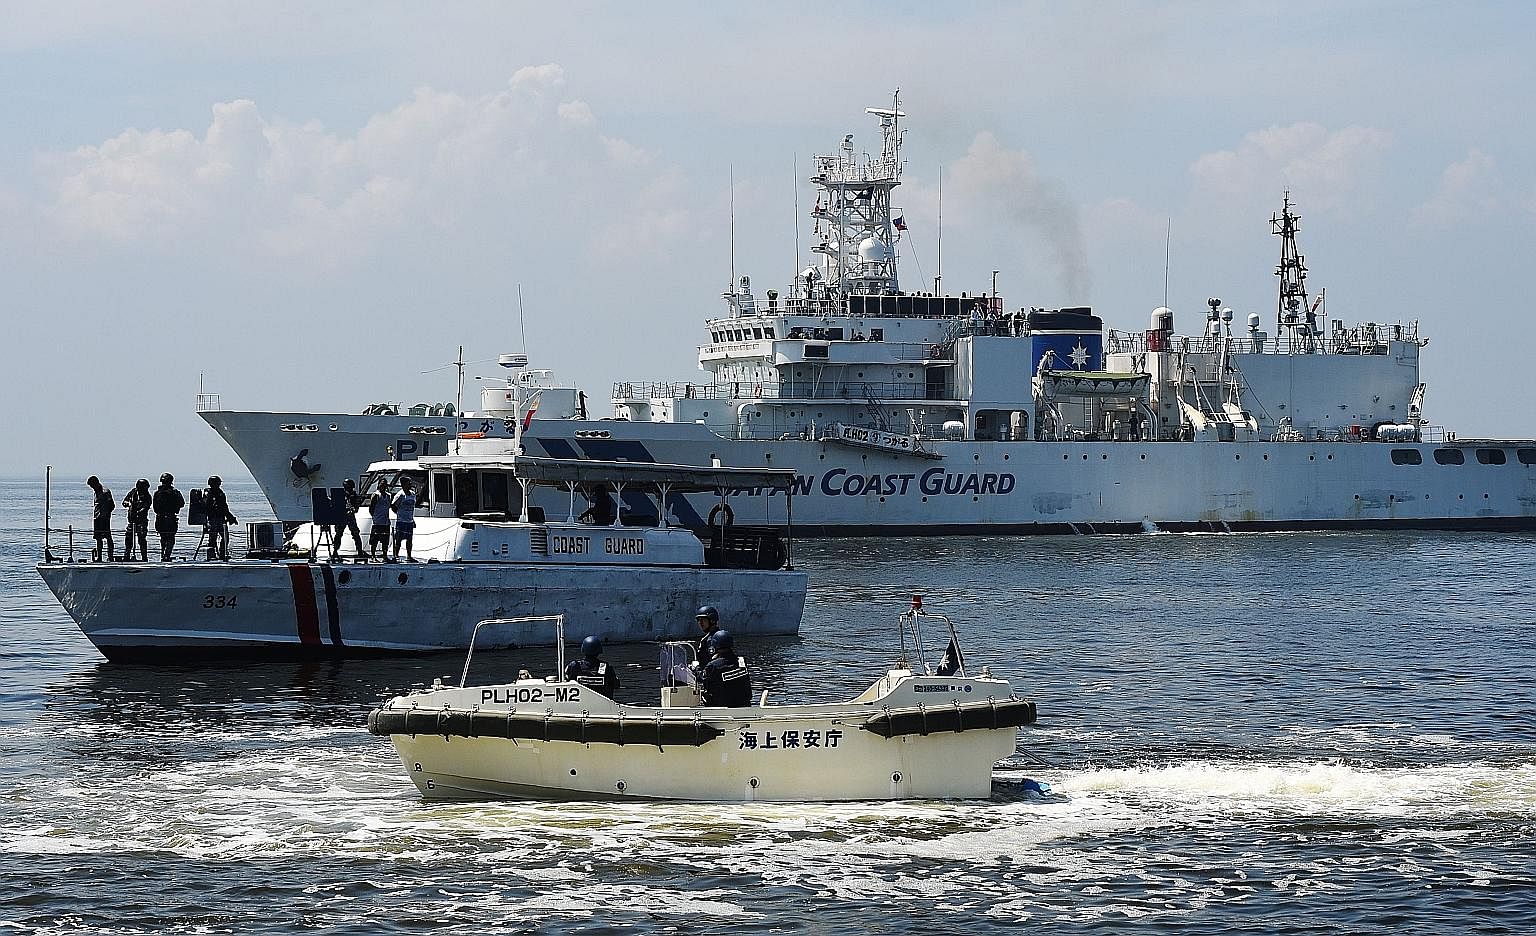 Japan Coast Guard vessels at an annual joint anti-piracy exercise in waters off Manila Bay on July 13 - a day after an arbitral tribunal ruled that China has "no historical rights" in the South China Sea.